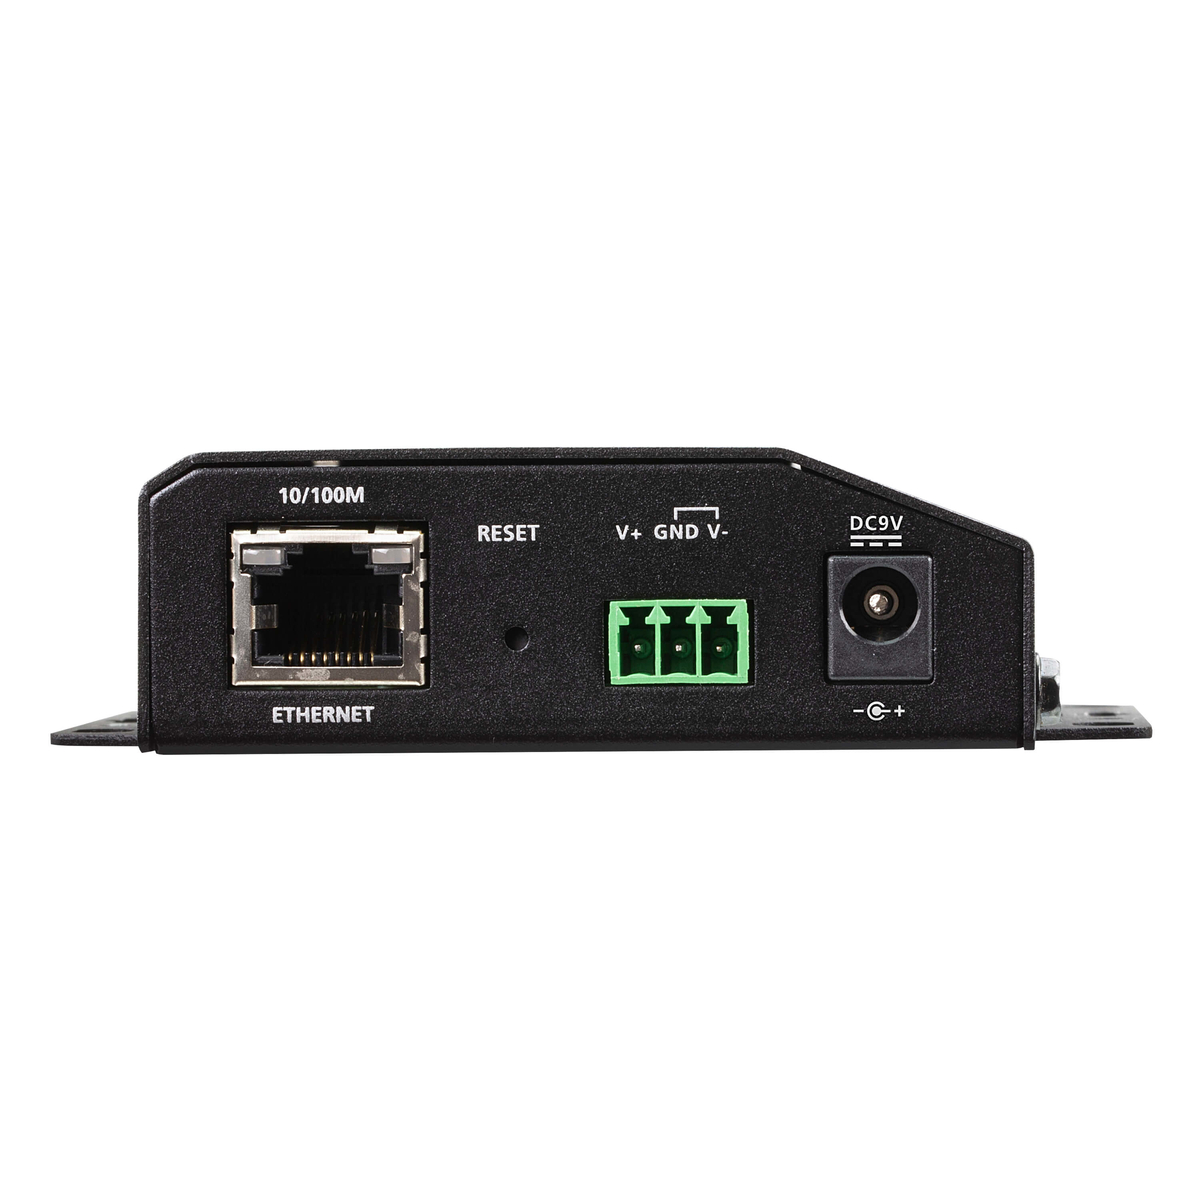 1-Port RS-232 Server with POE